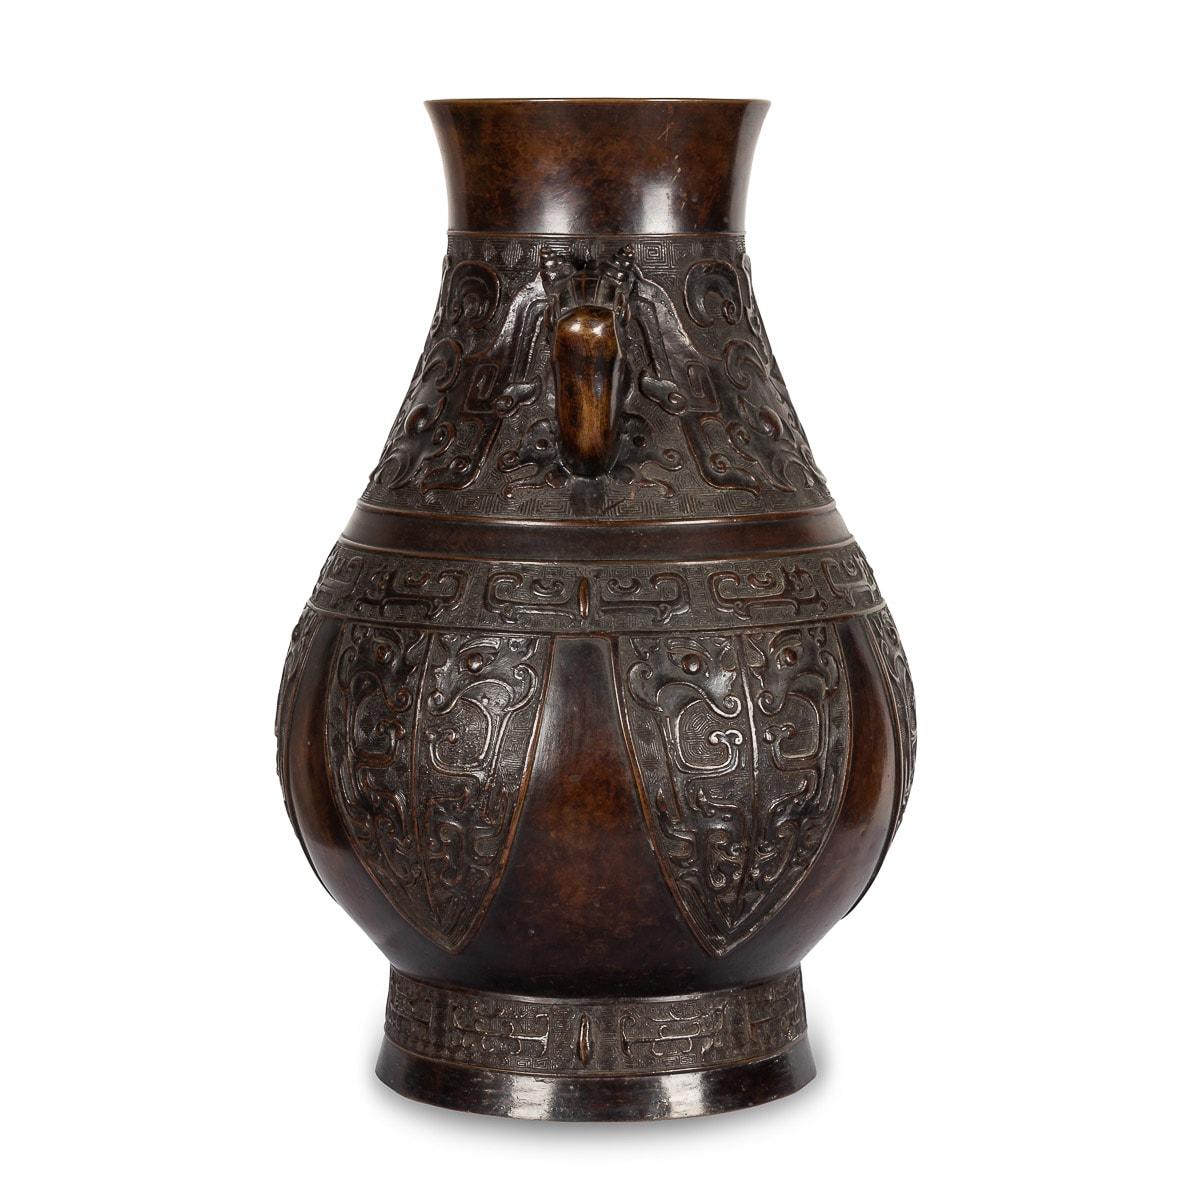 Antique 19th Century Chinese bronze vase, the pear-shaped body supported on a spreading foot, the waisted neck flanked by a pair of loop handles issuing from dragon heads, cast in low relief to the exterior with two wide bands of confronting